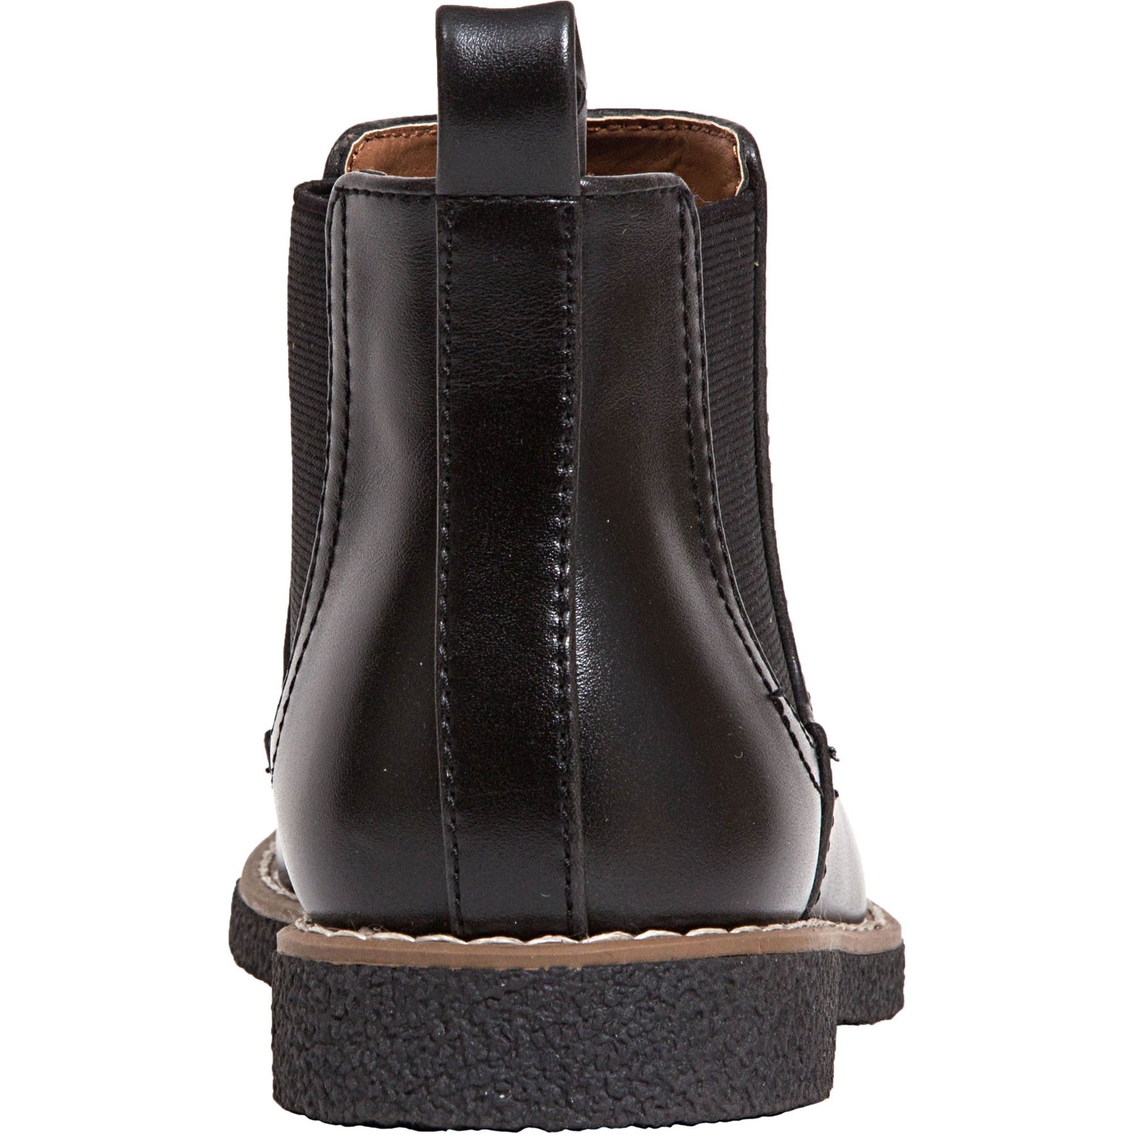 Deer Stags Boys Zane Dress Boots - Image 8 of 8